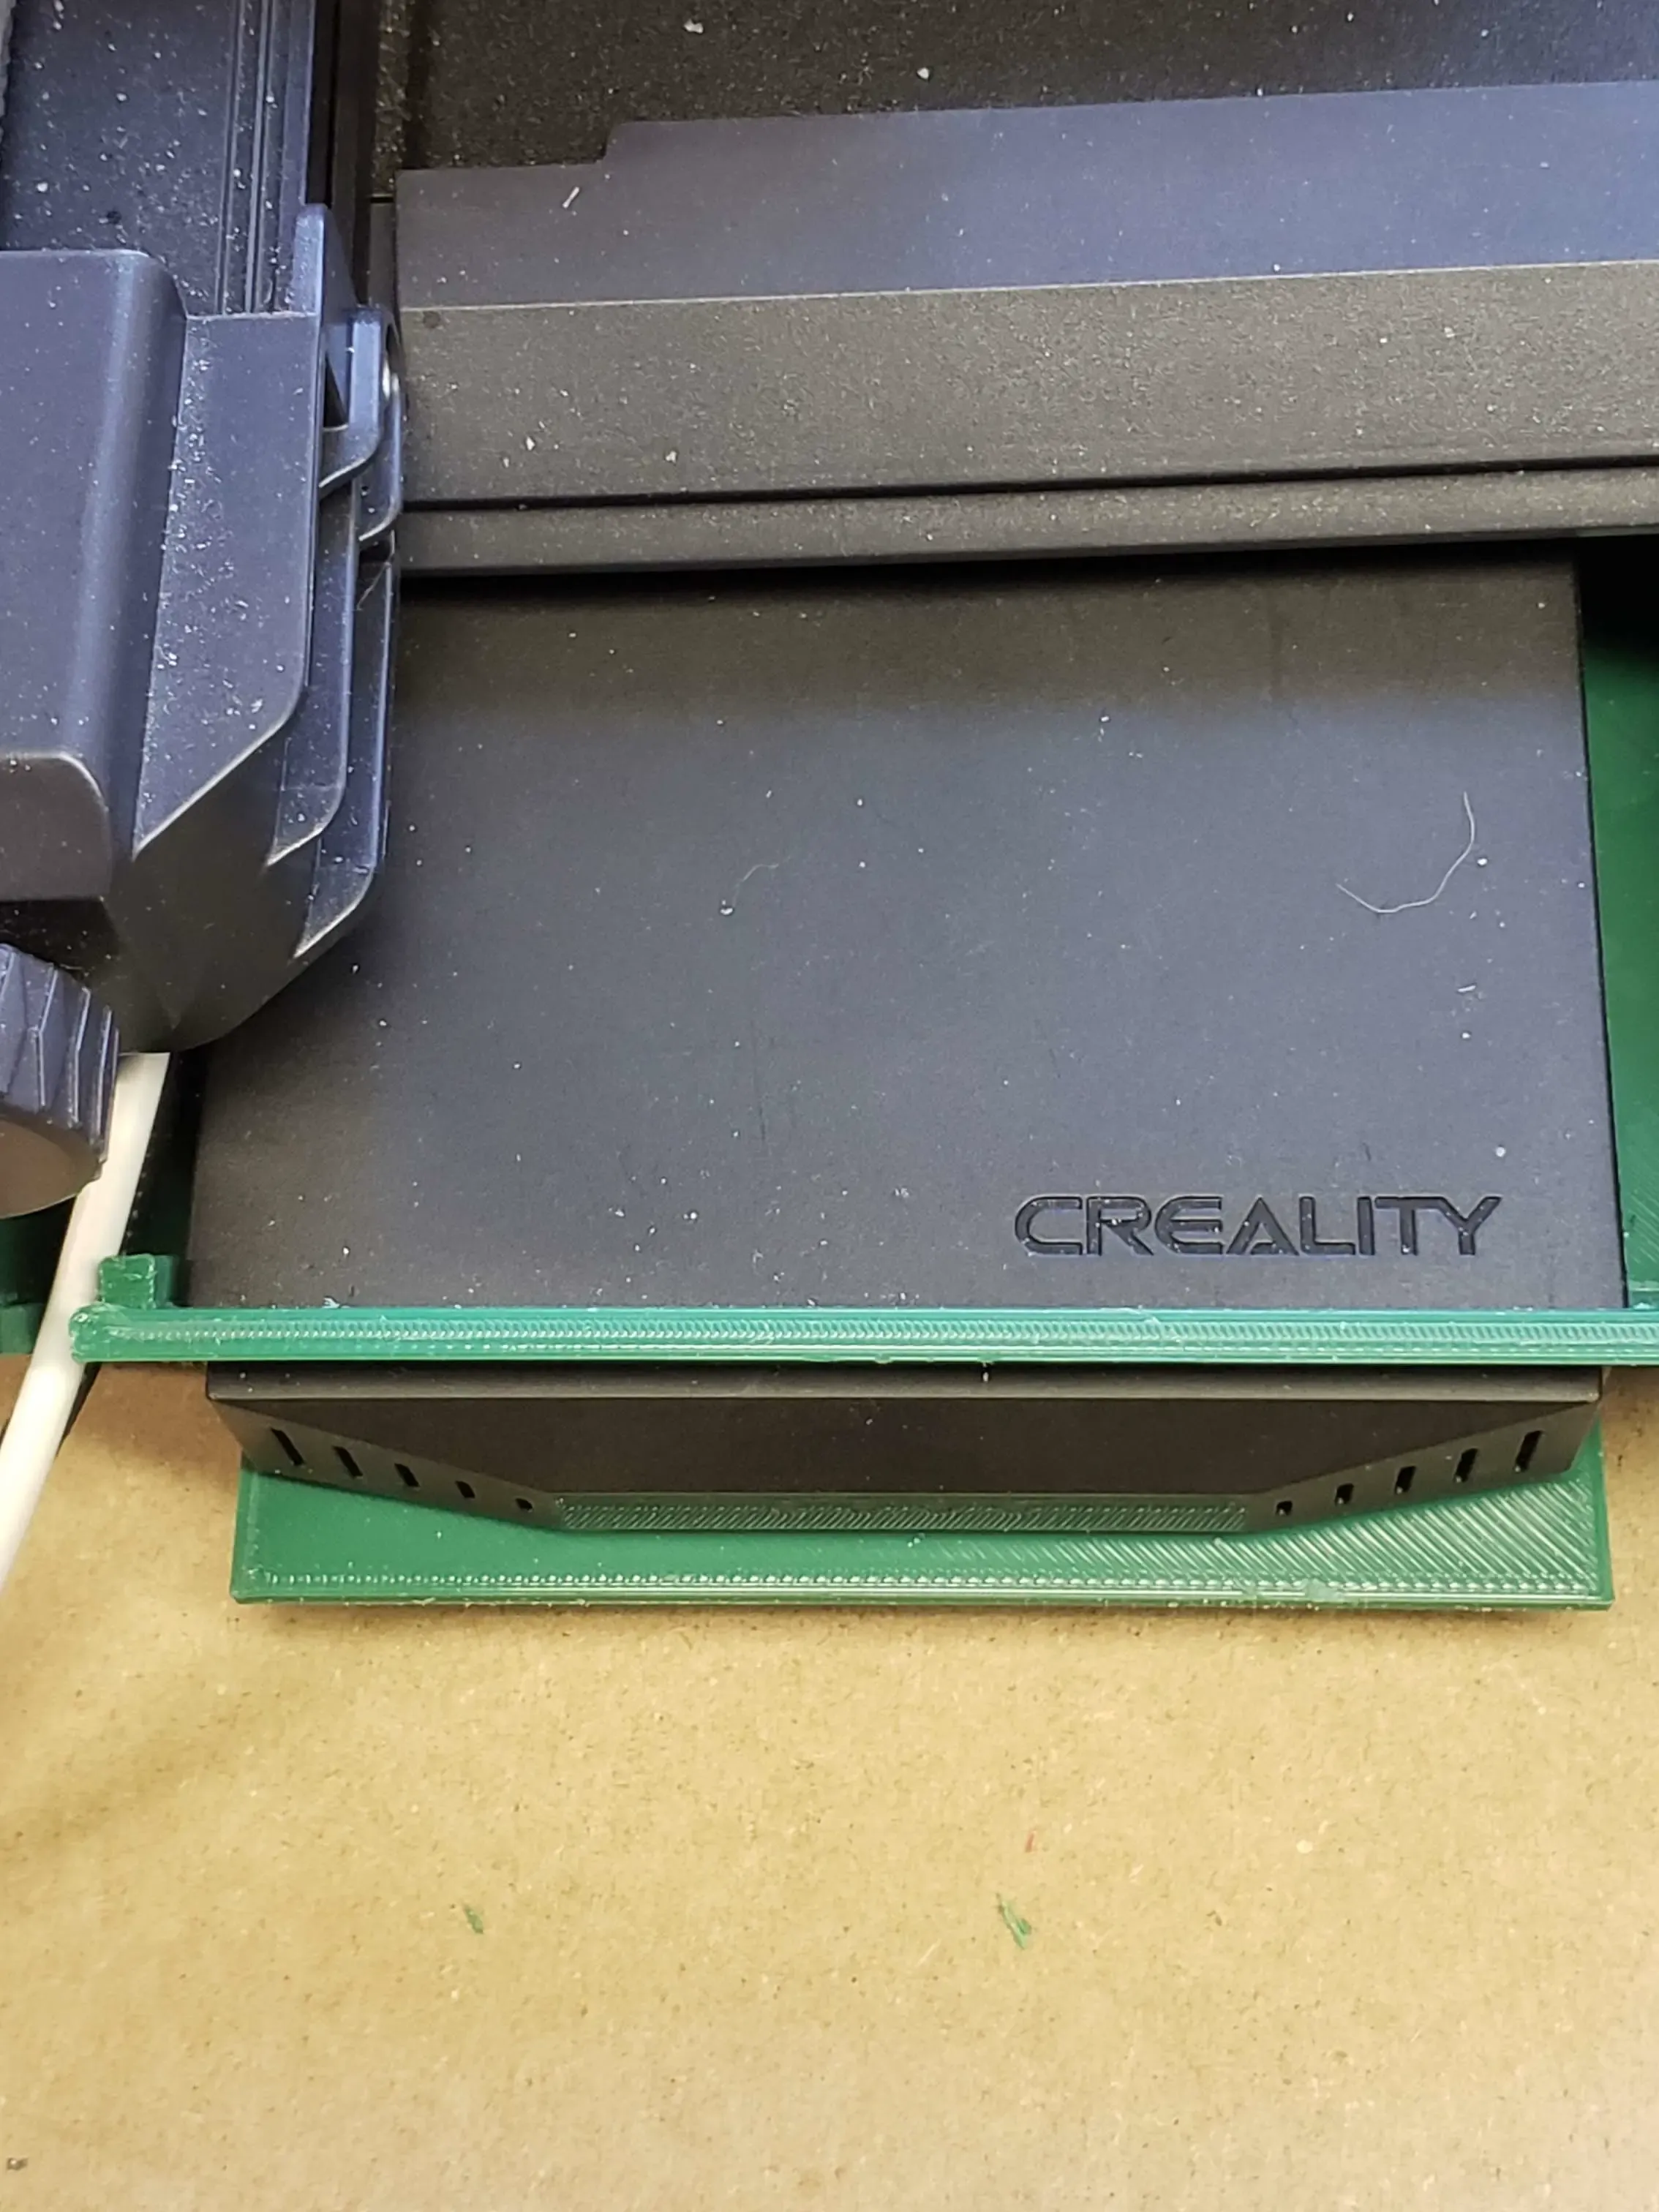 Ender 3 S1 Drawer for Creality WIFI Box